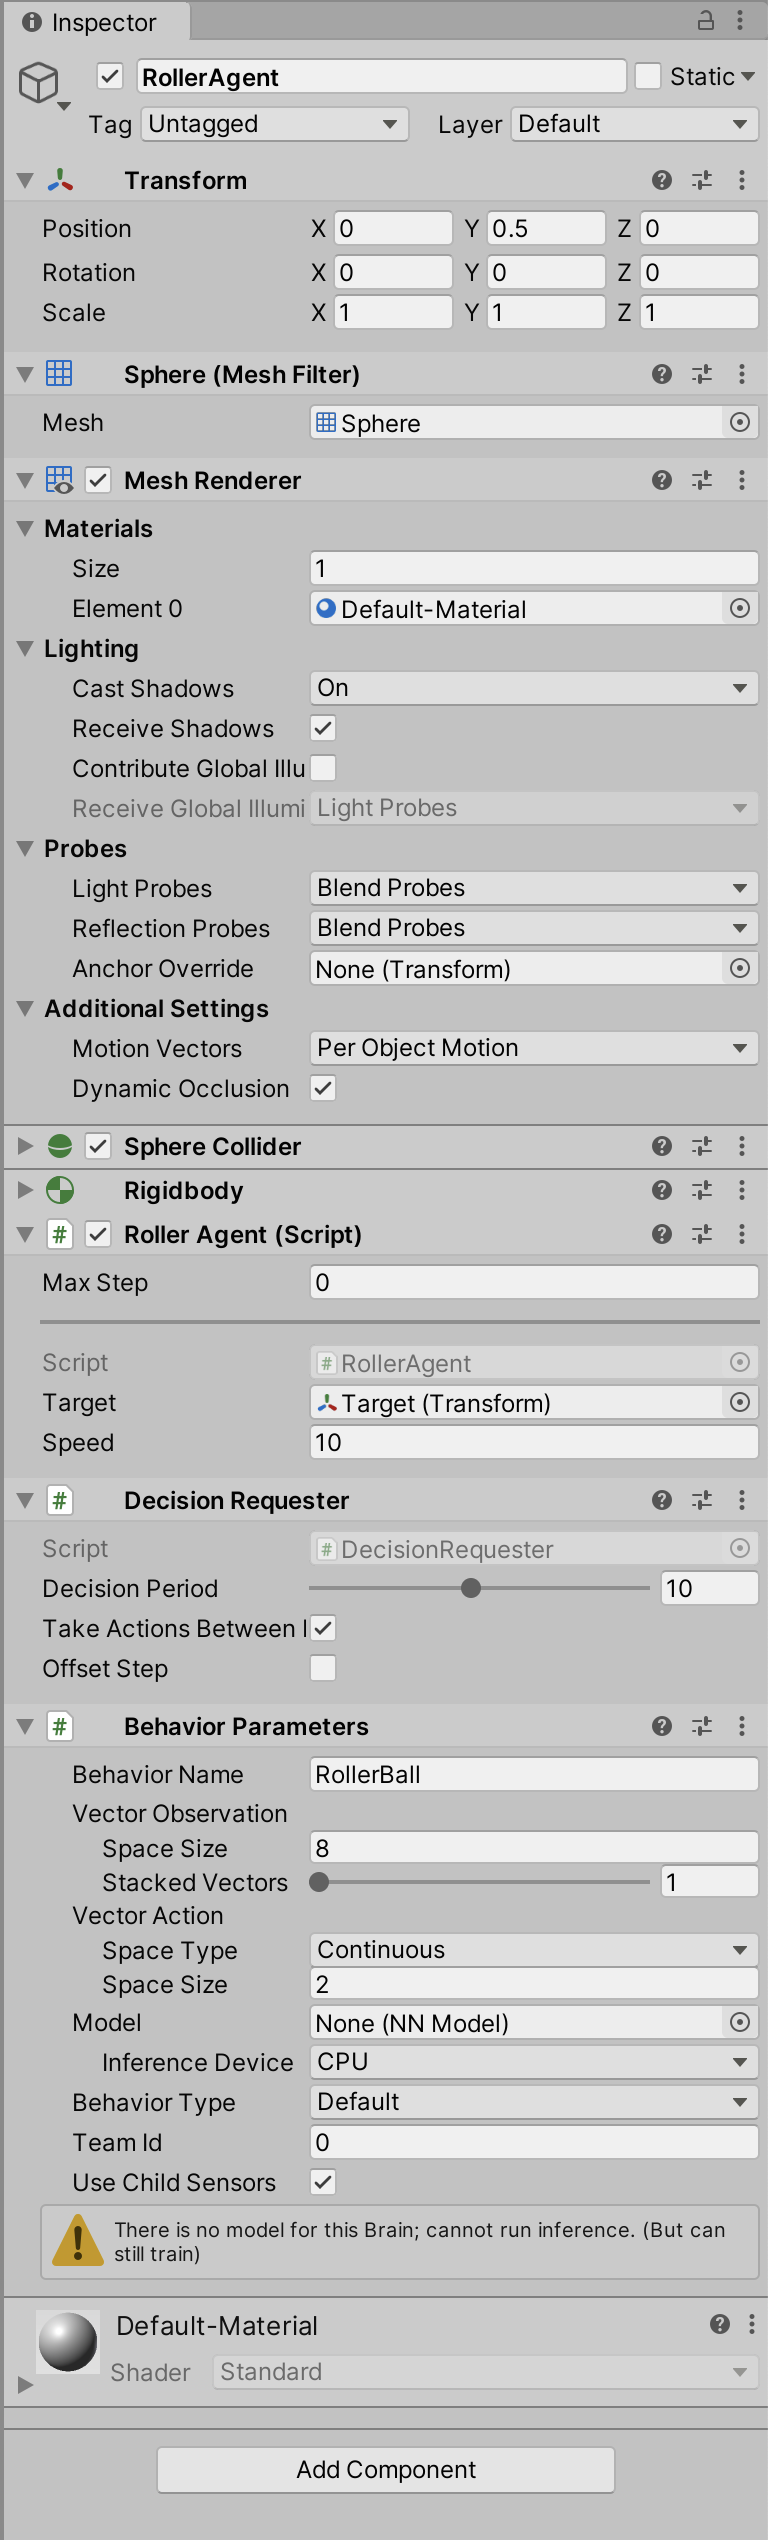 The Agent GameObject in the Inspector window